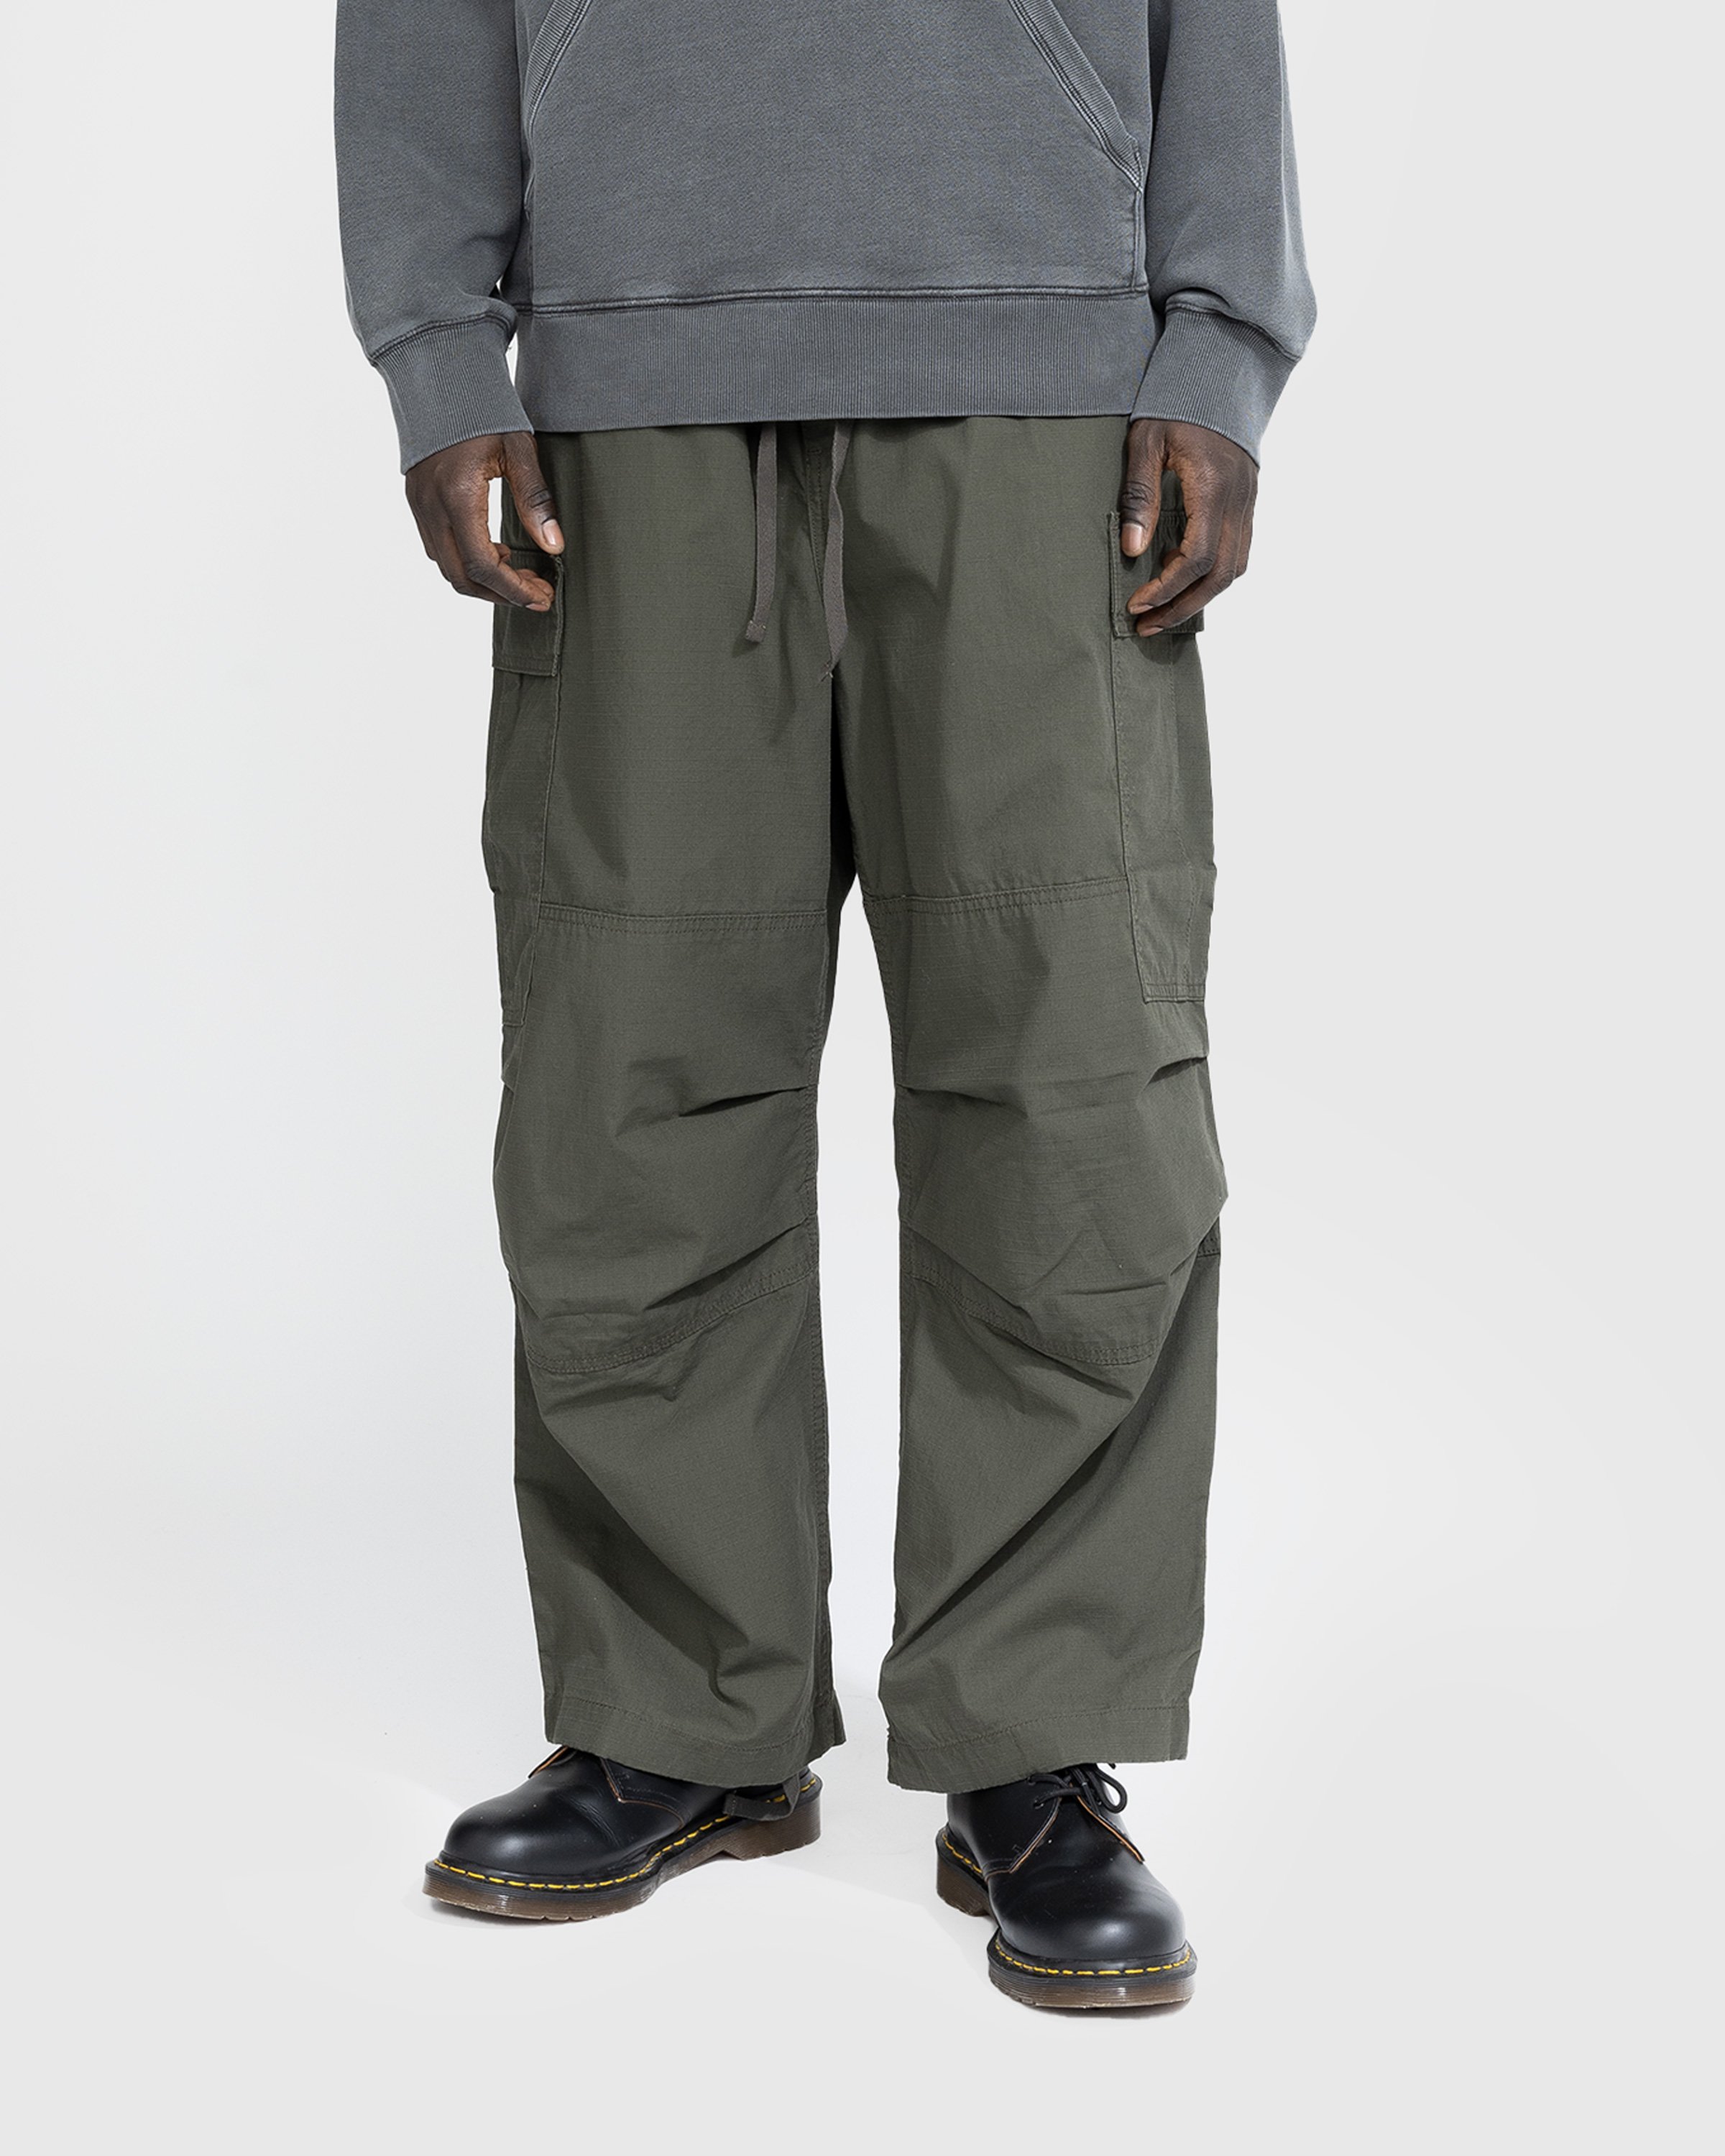 Carhartt WIP - Jet Cargo Pant Cypress/Rinsed - Clothing - Green - Image 2